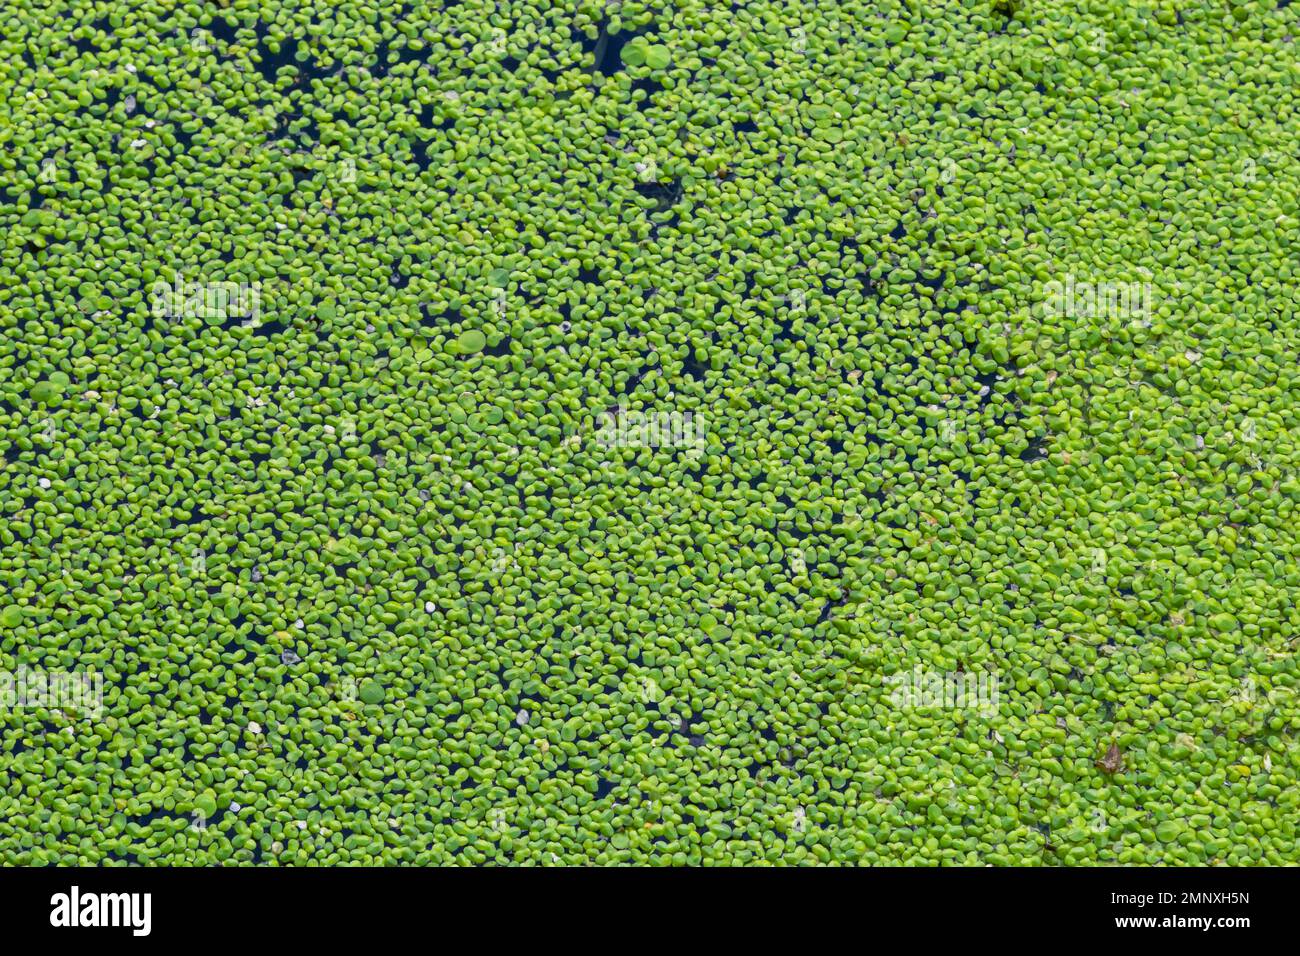 Duckweed, Natural Green Duckweed on The water for background or texture. Stock Photo